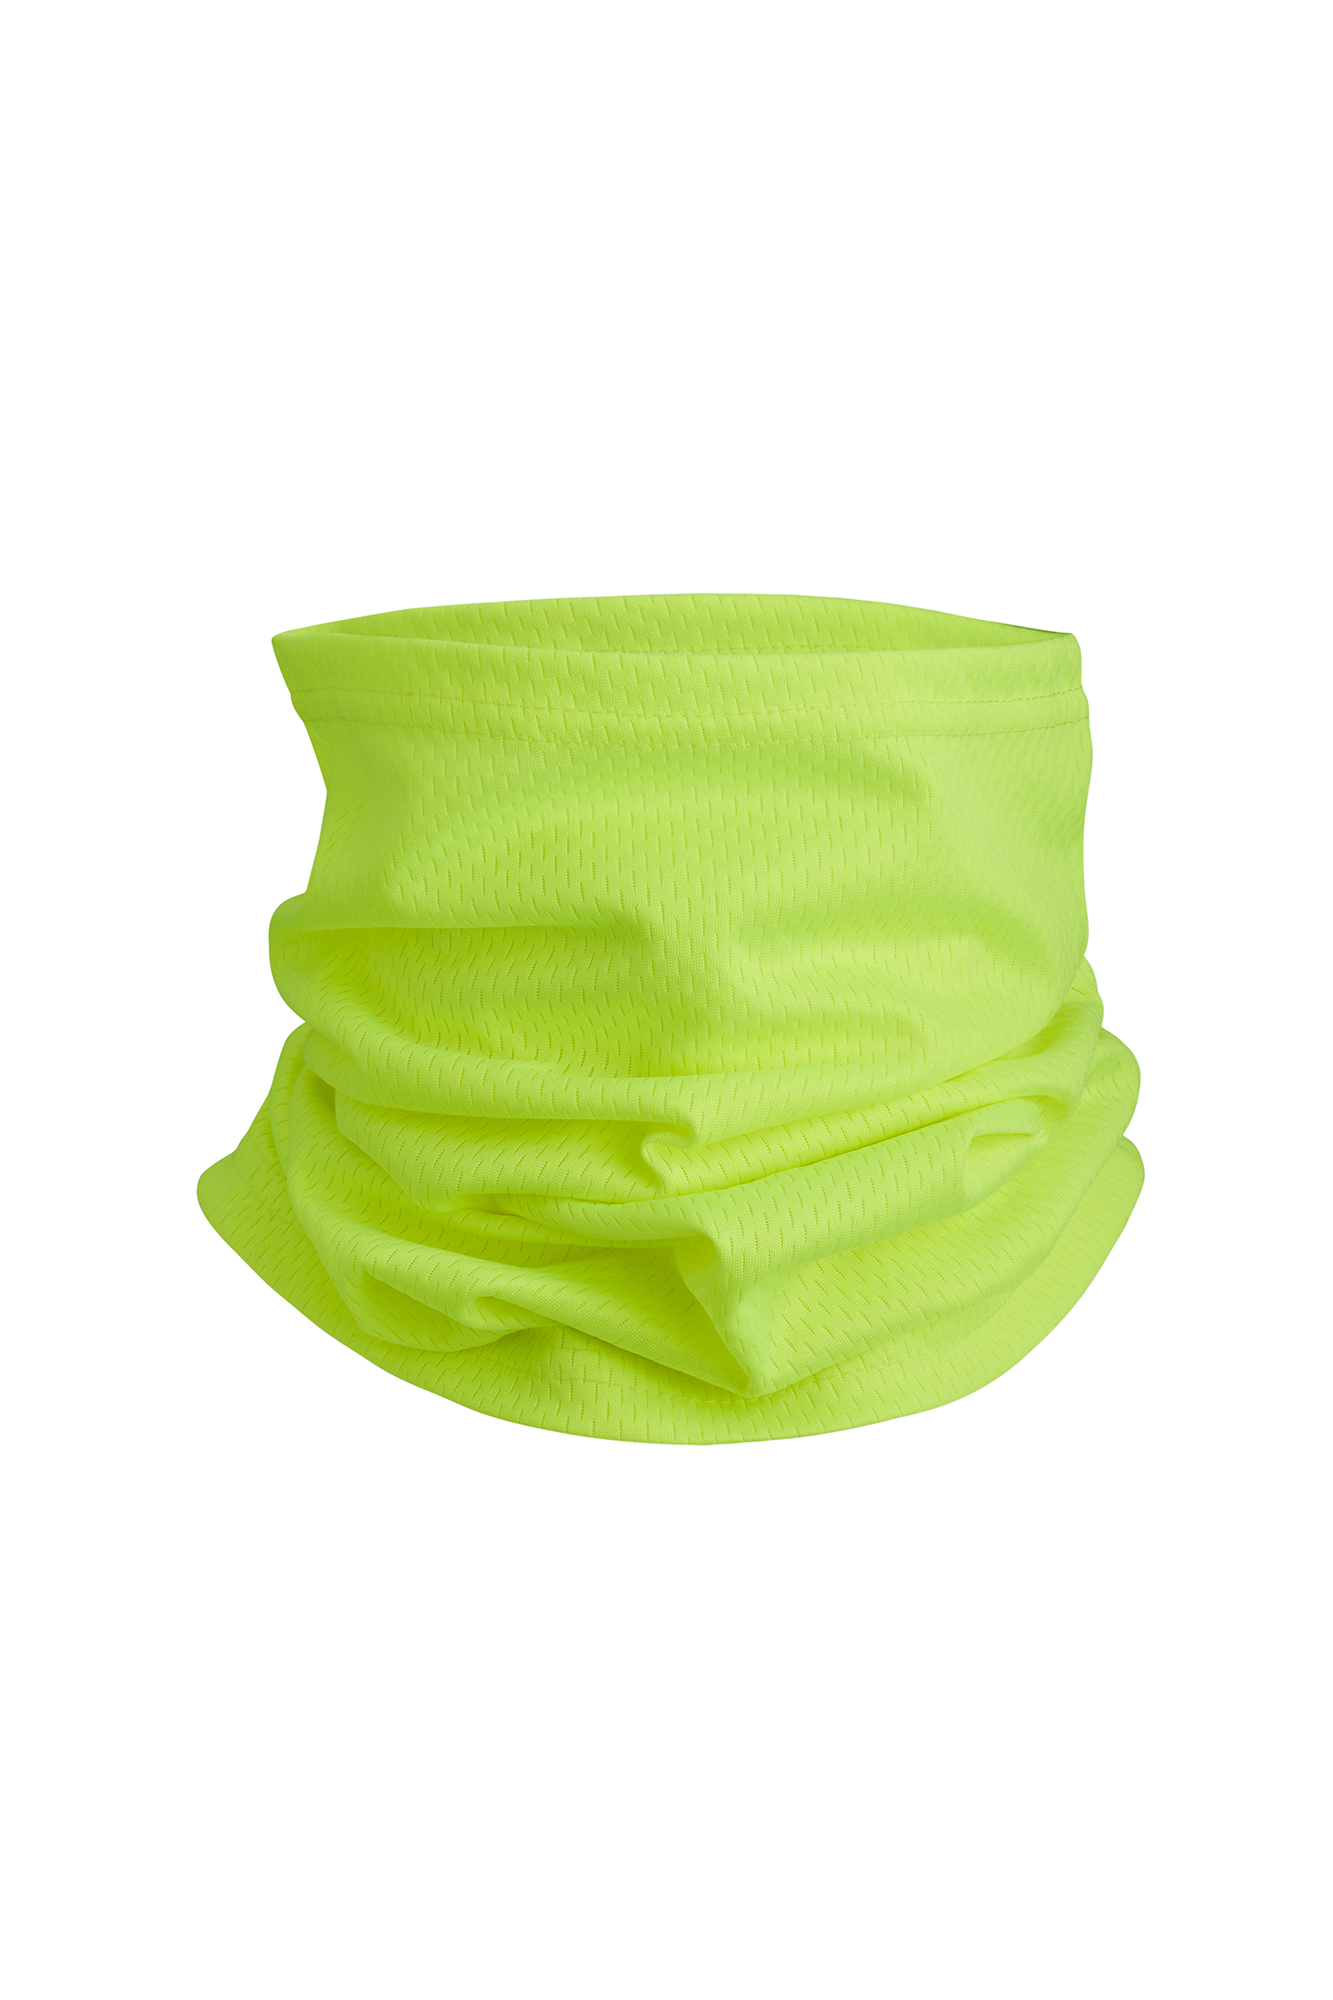 Face and Neck Gaiter | Breathable UV Protective Neck Gaiter